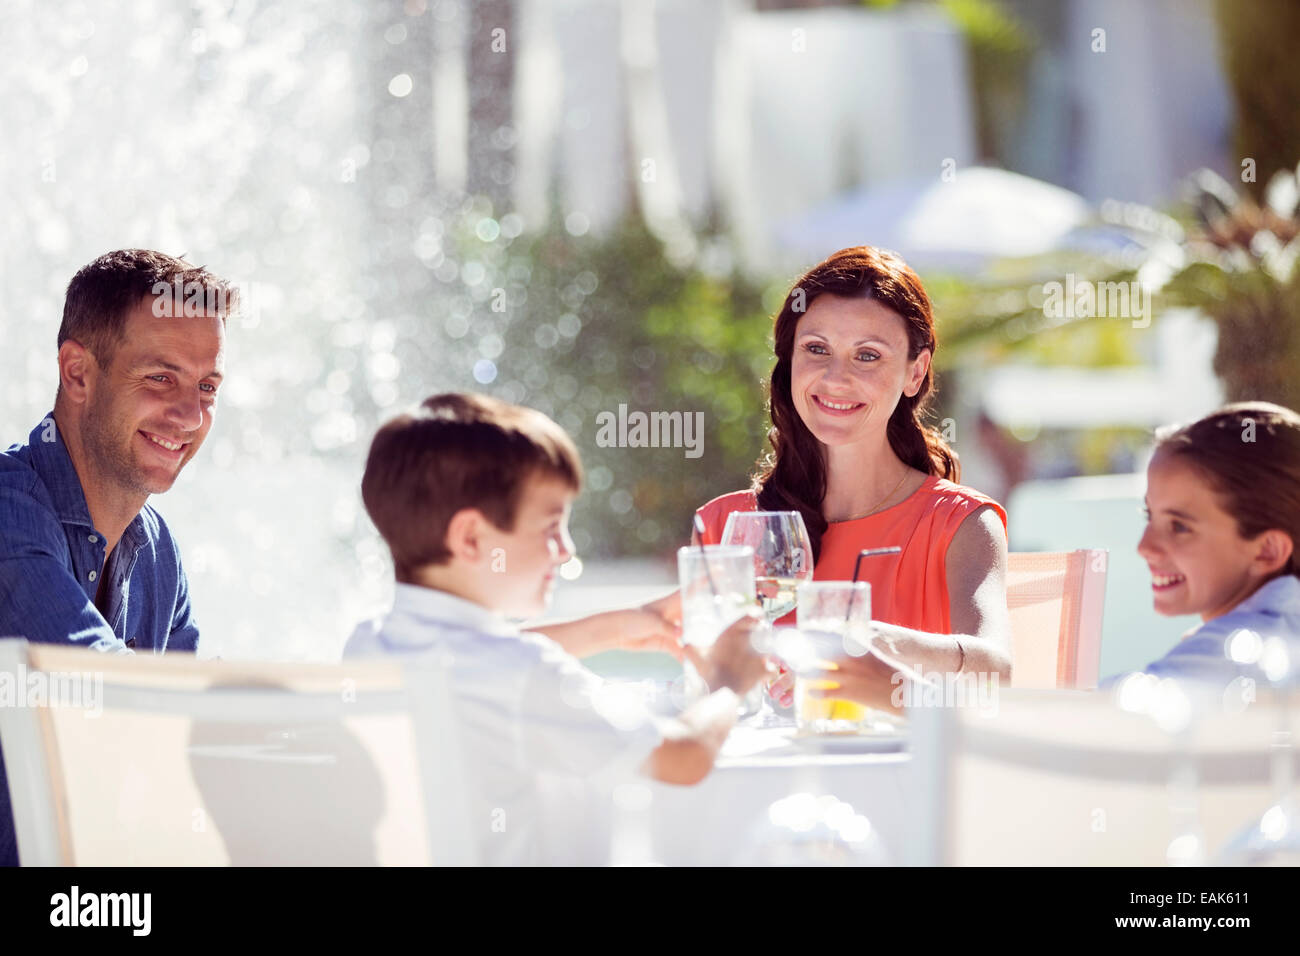 Family with two children raising toast at table outdoors Stock Photo